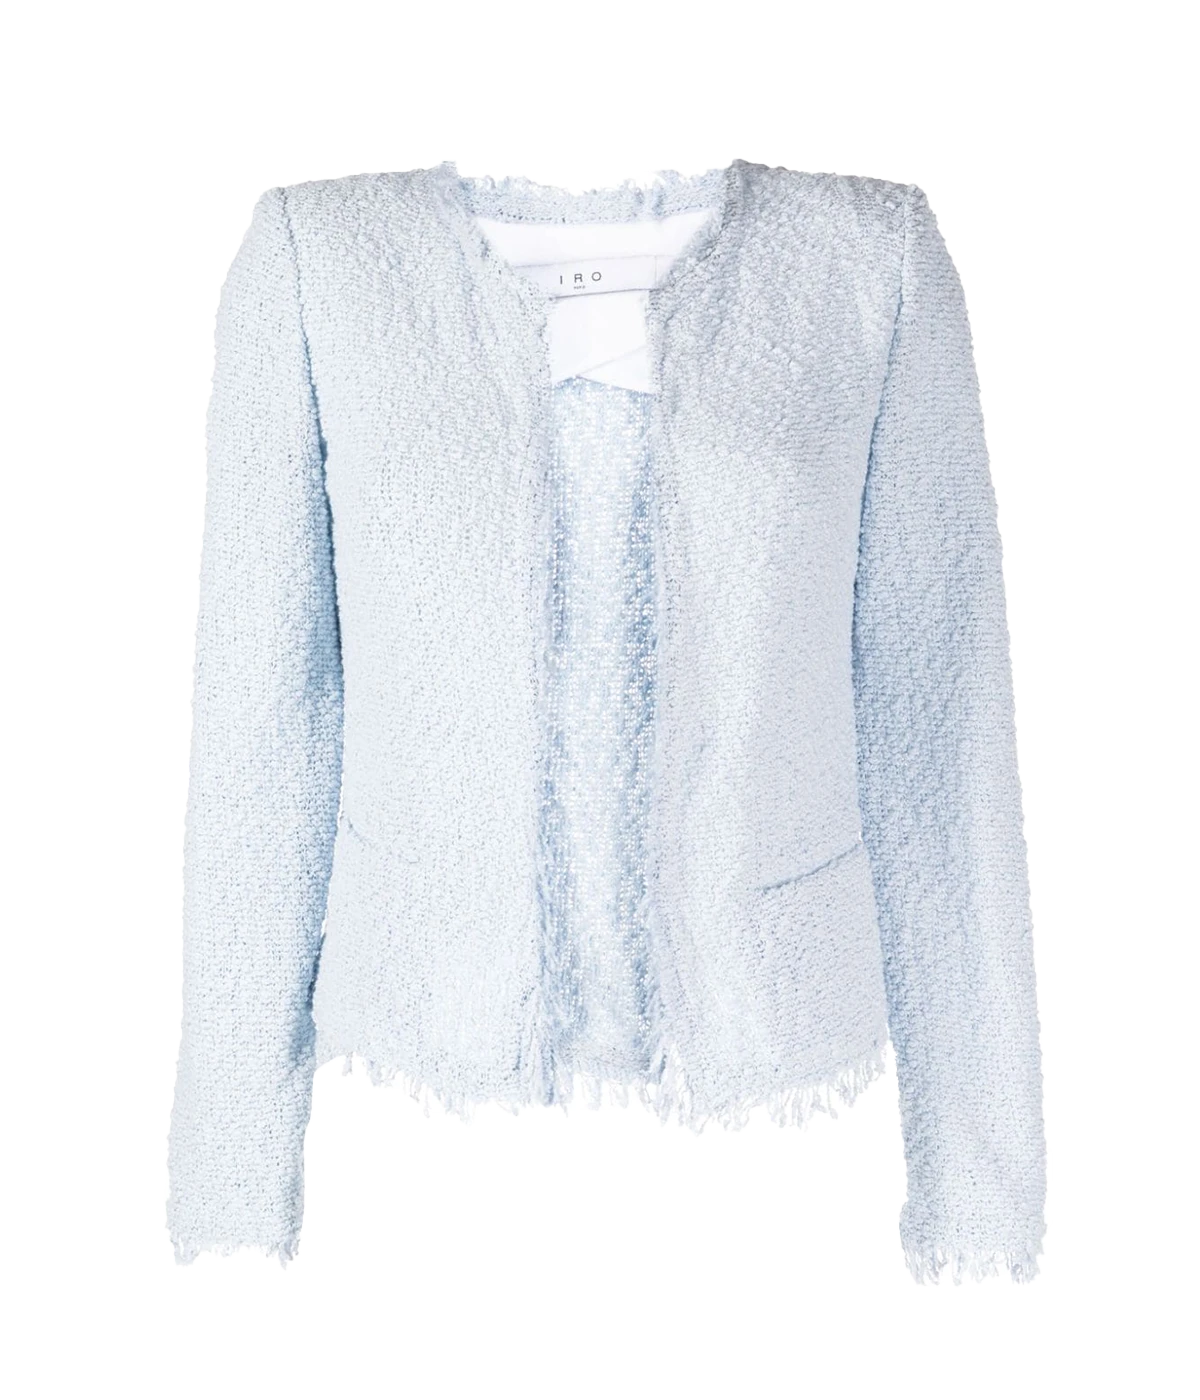 Supple cotton-blend boucle yarn tweed garment in light blue. Featuring structured shoulders and a classic cut, the fringed edge adds a cool edge to a timeless, long-sleeve, crew neck jacket. 